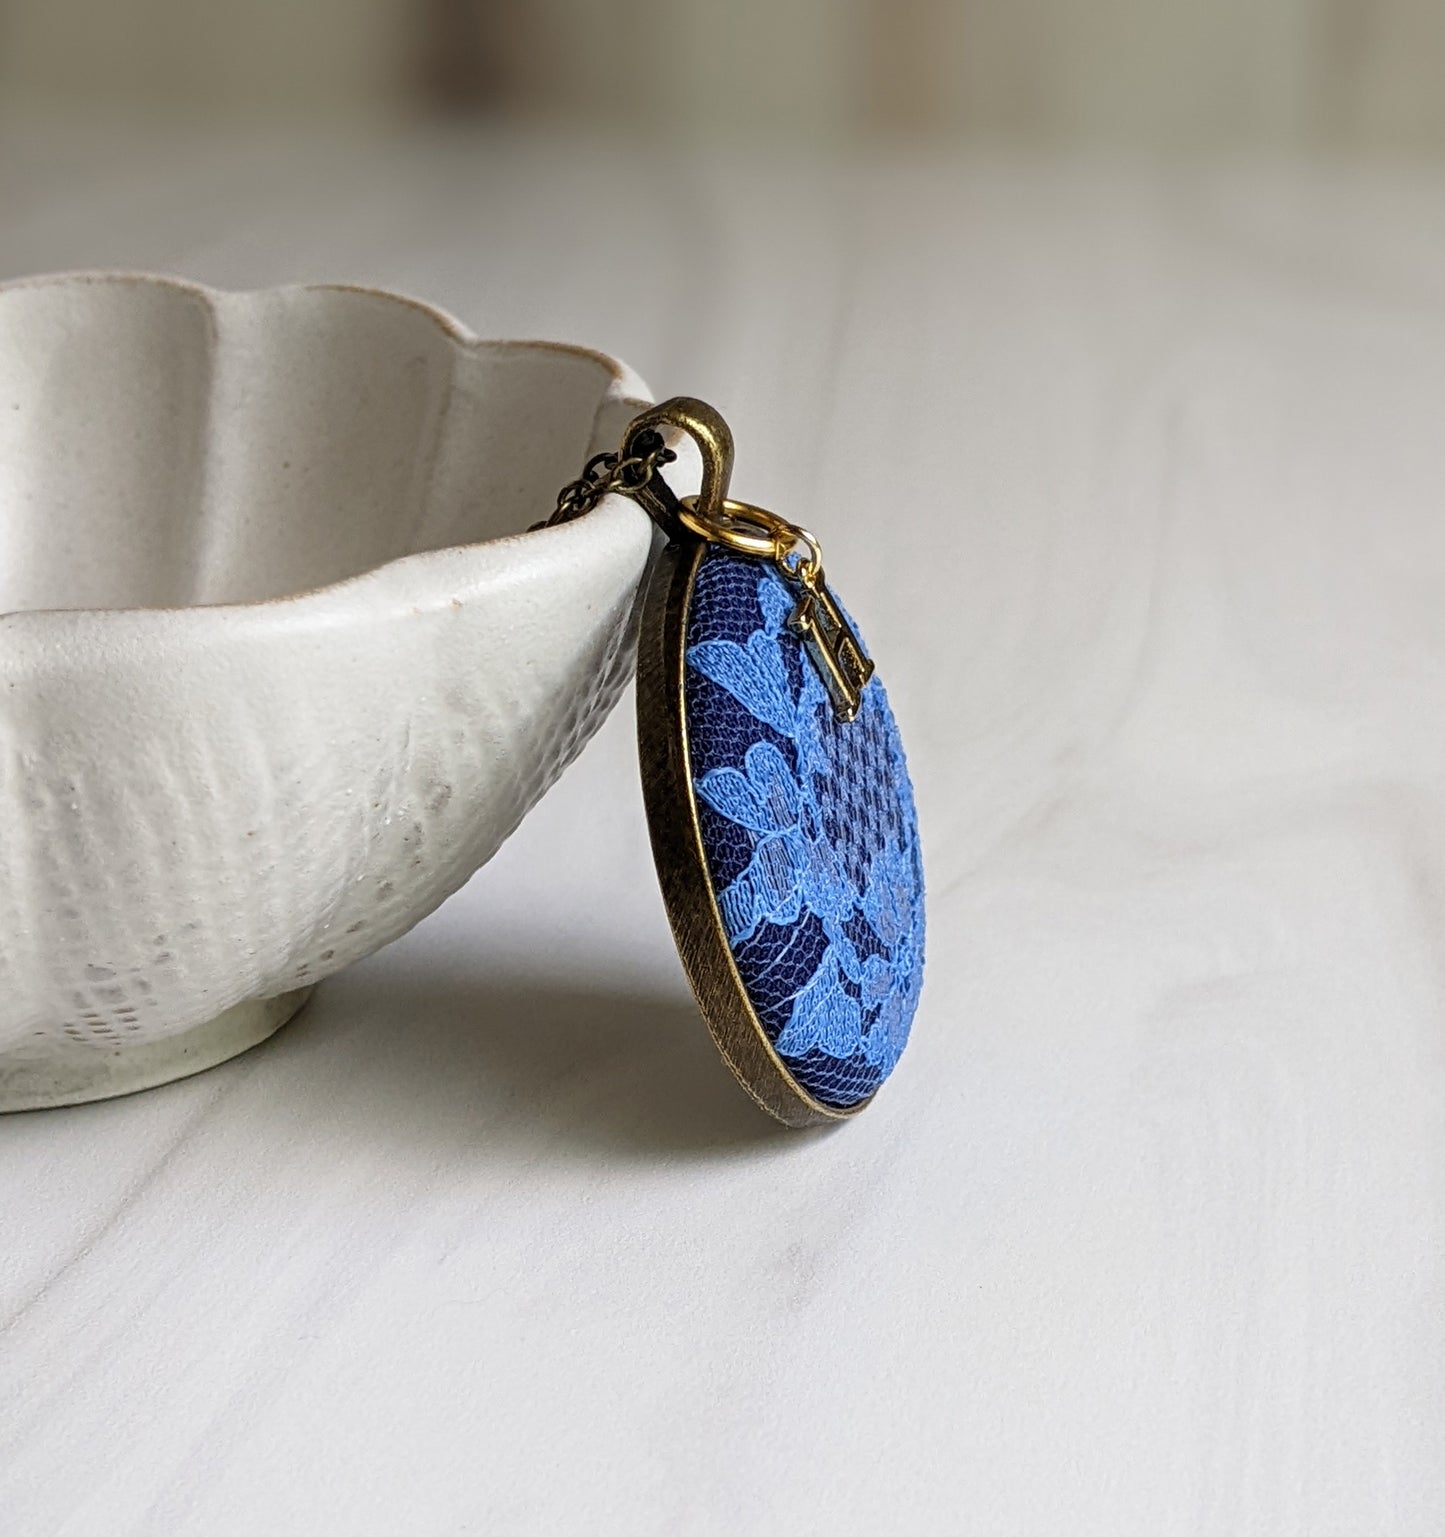 Initial Necklace With Vintage Blue Flower Lace, Anniversary Gift Idea For Wife Or Bride, Personalized Gift For Her